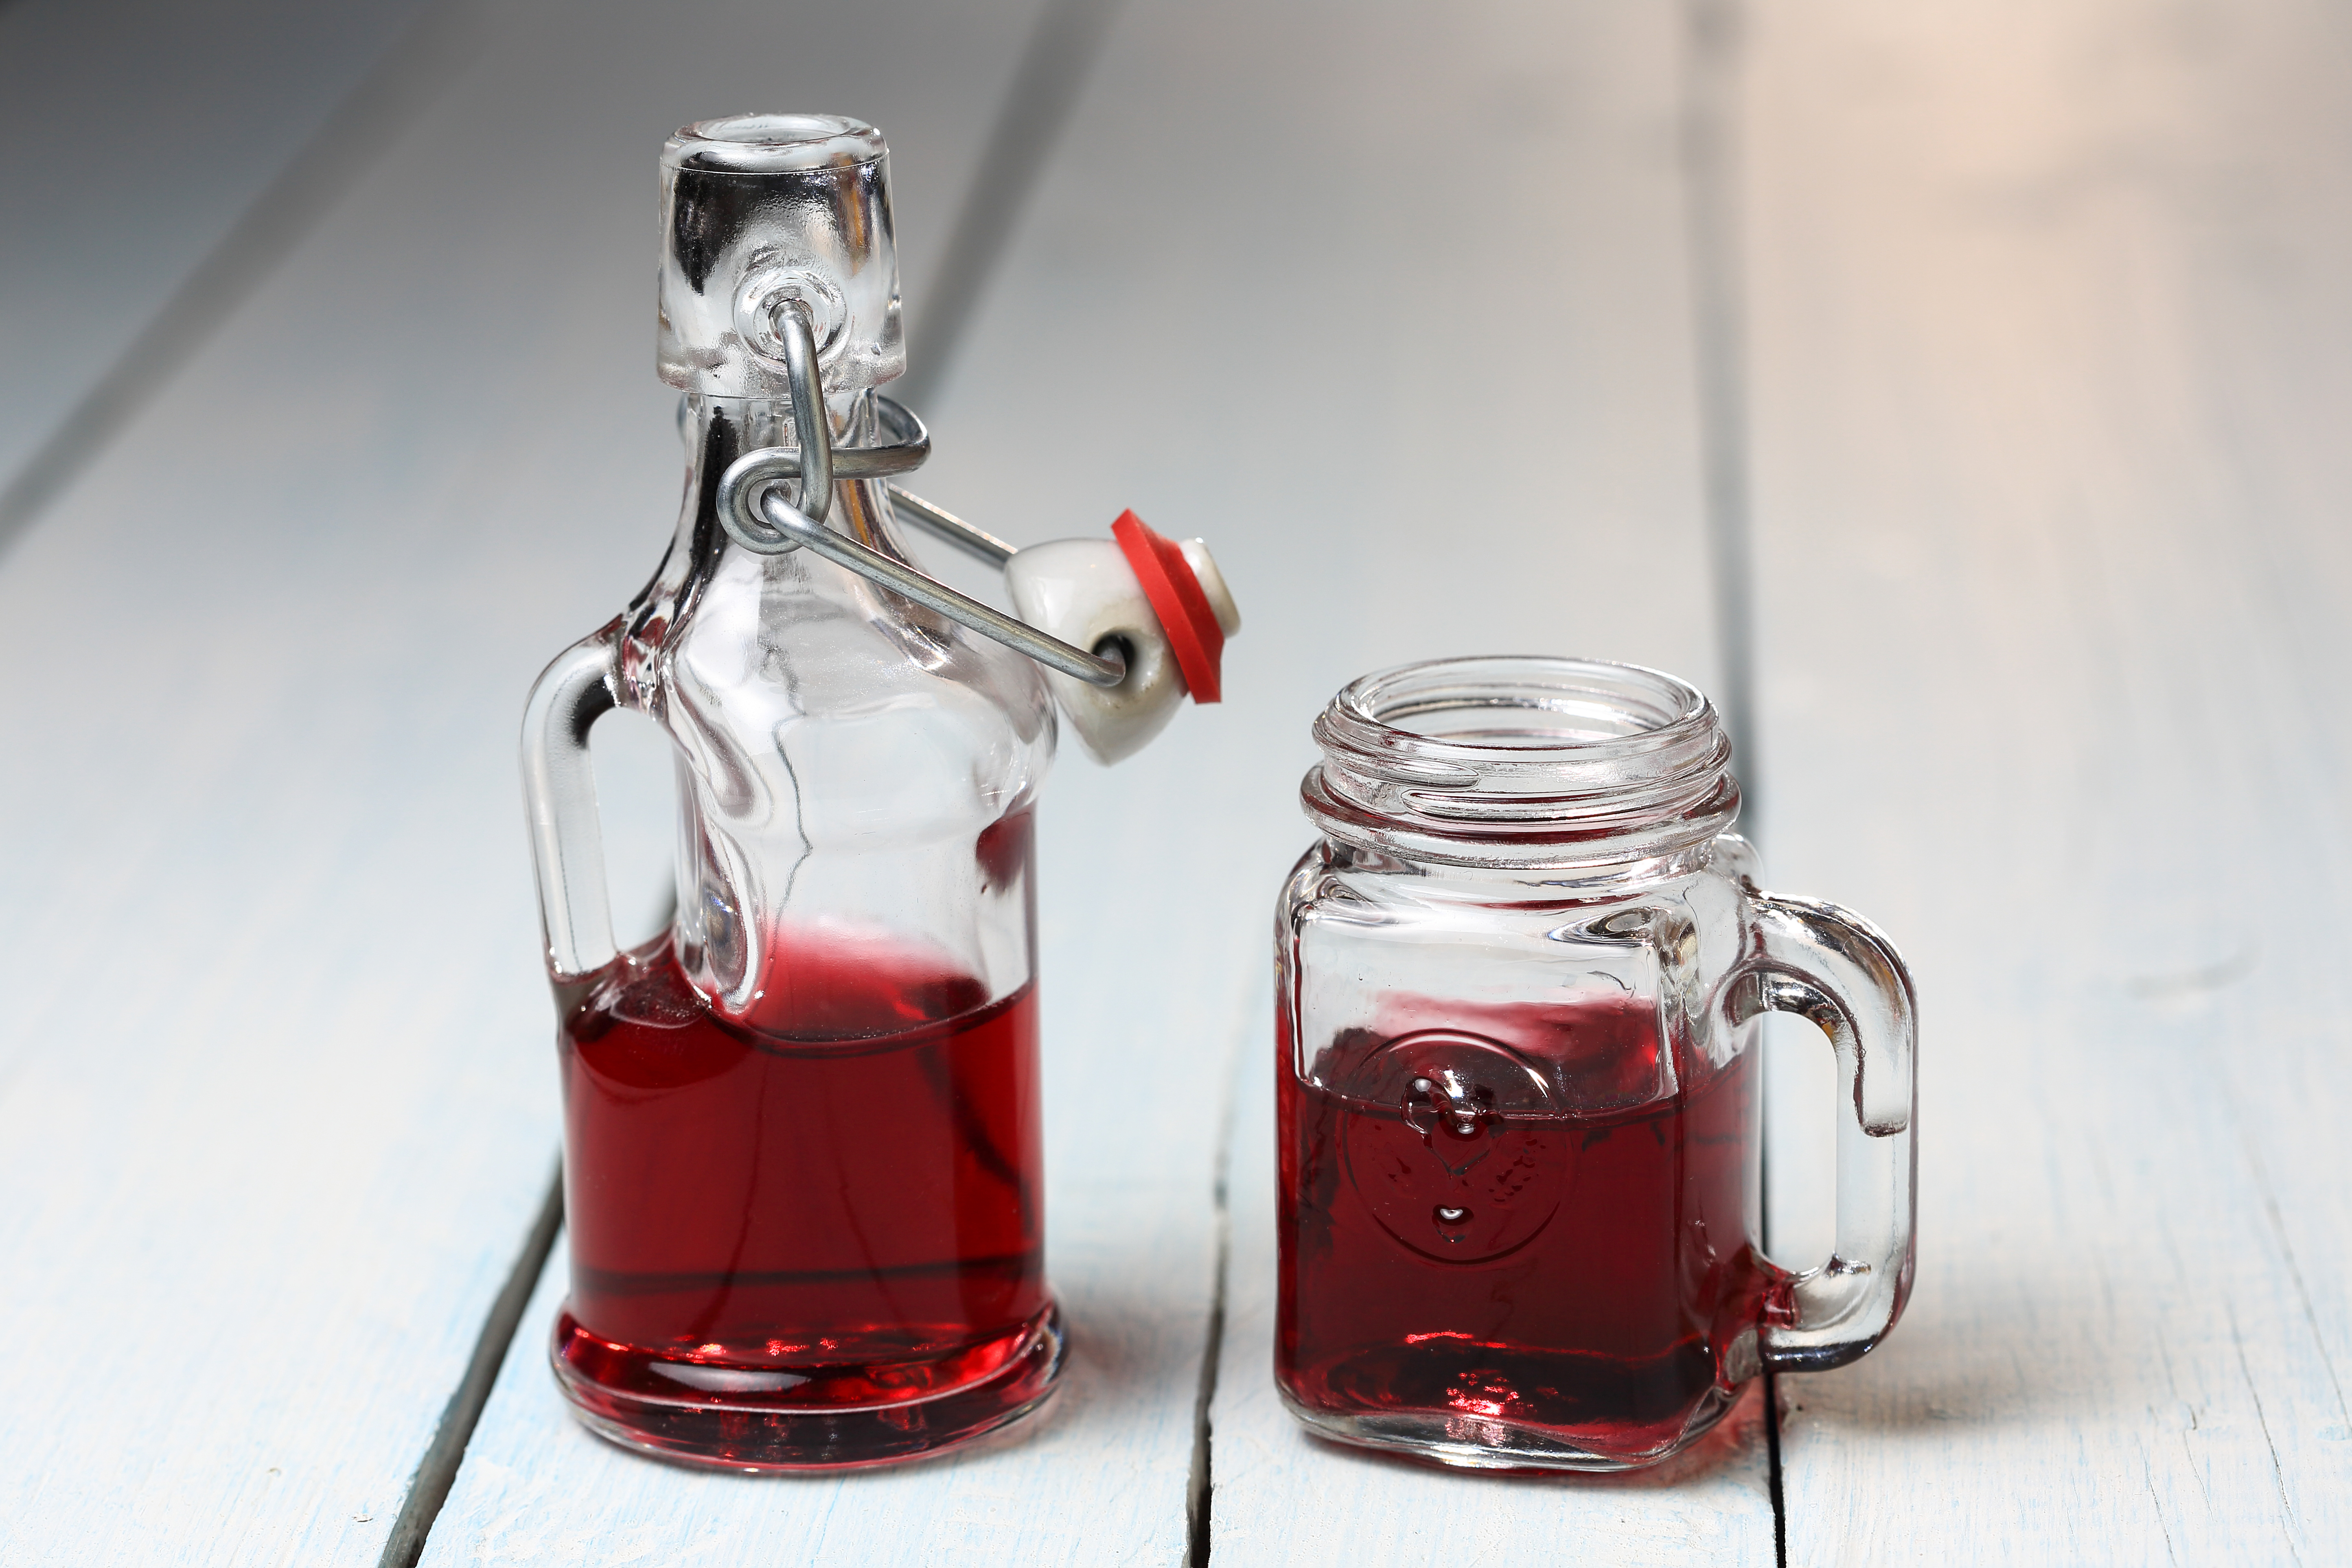 Red wine in a glass vessel and mug